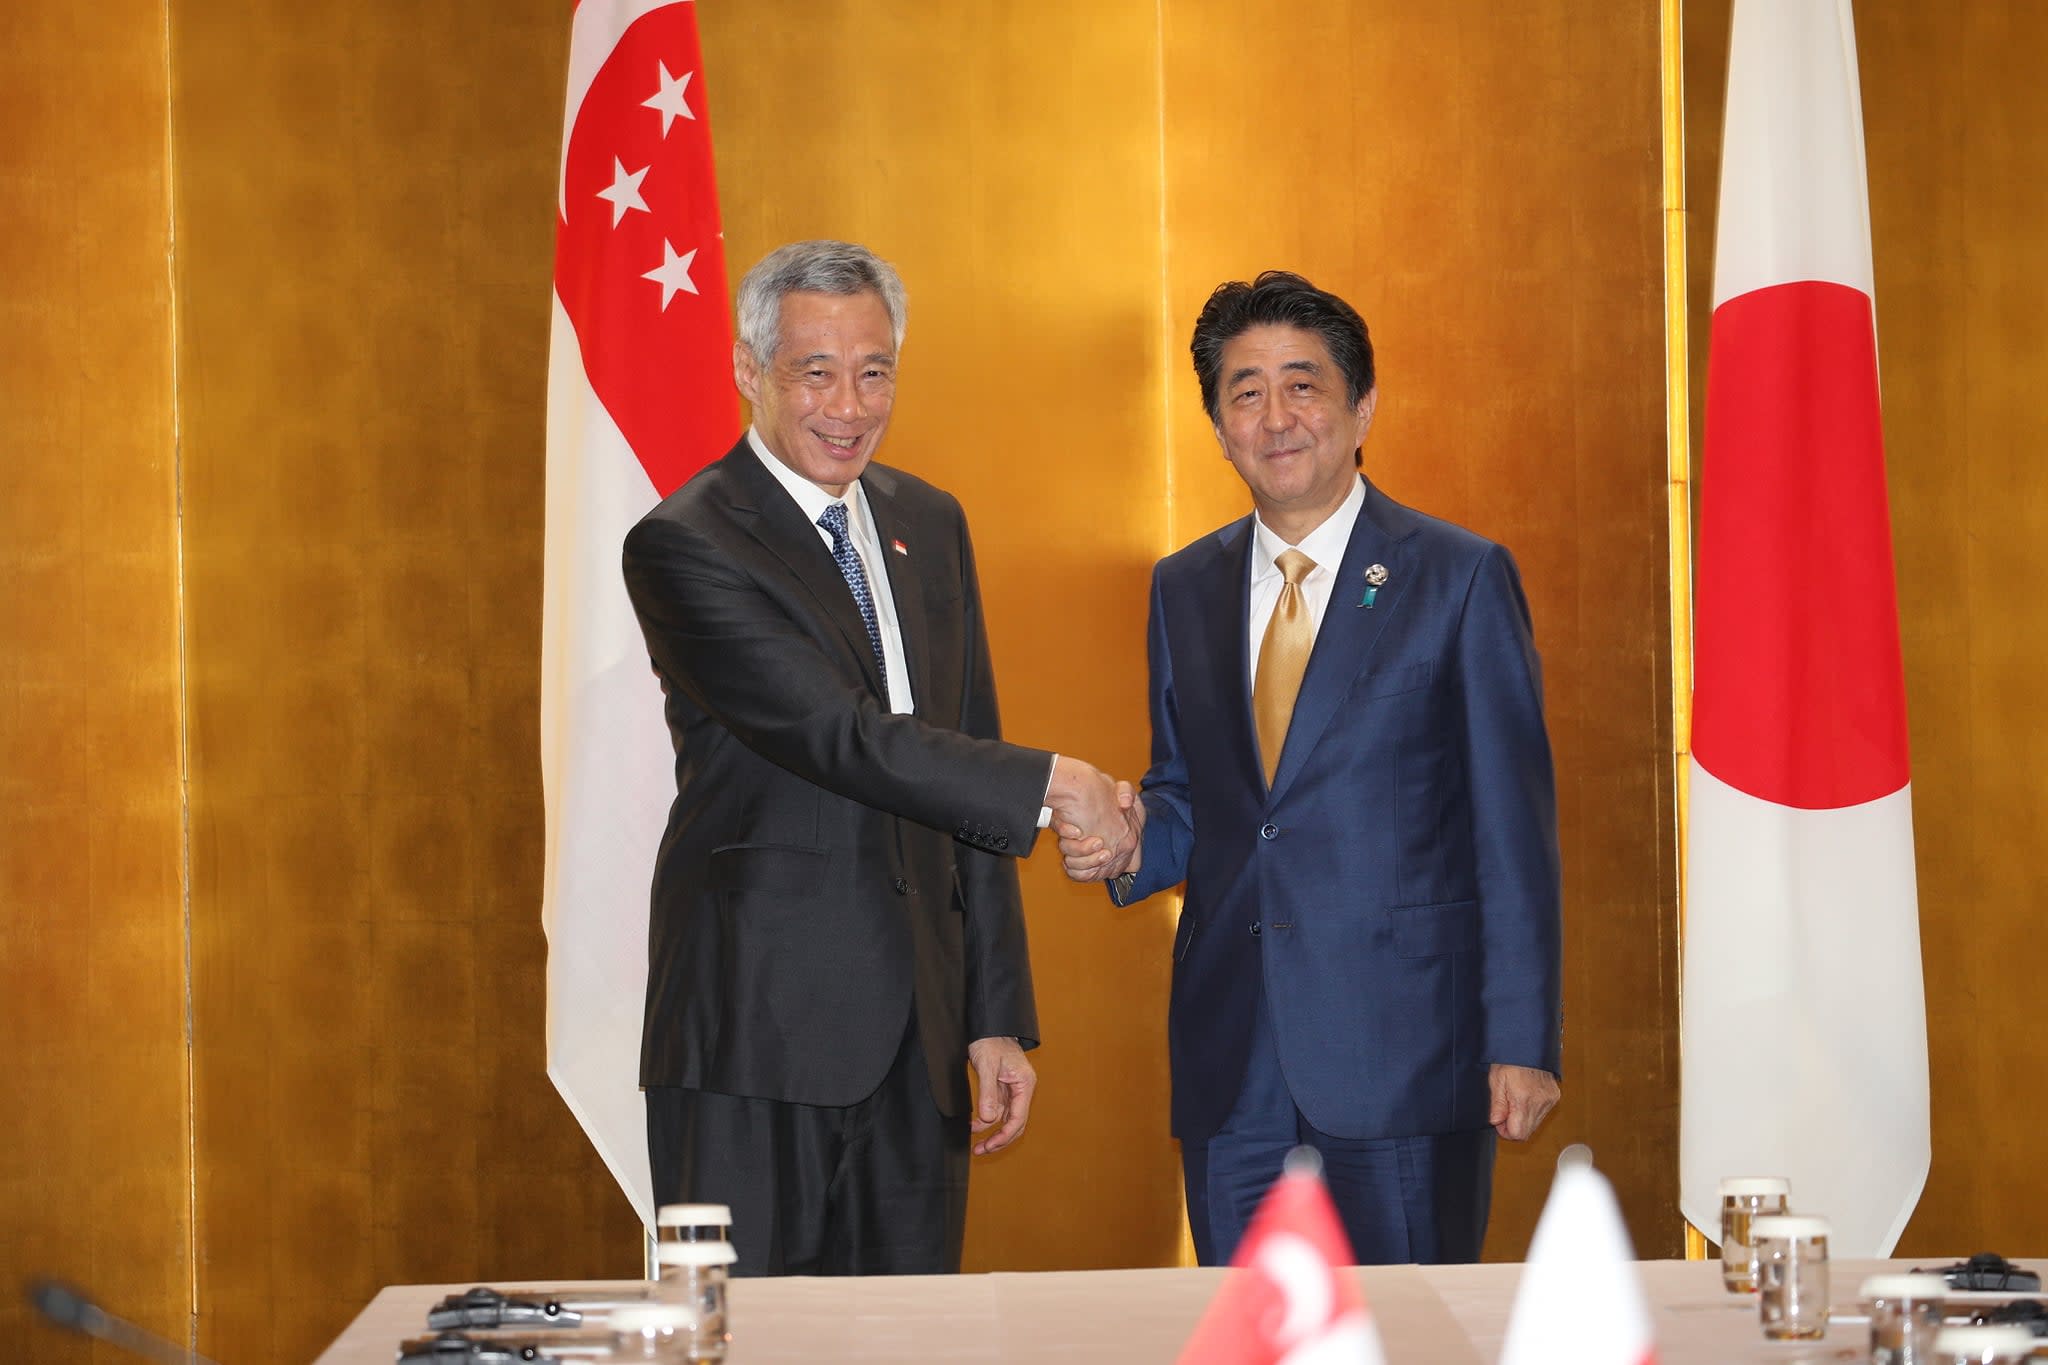 PM Lee Hsien Loong pays tribute to Shinzo Abe after ...